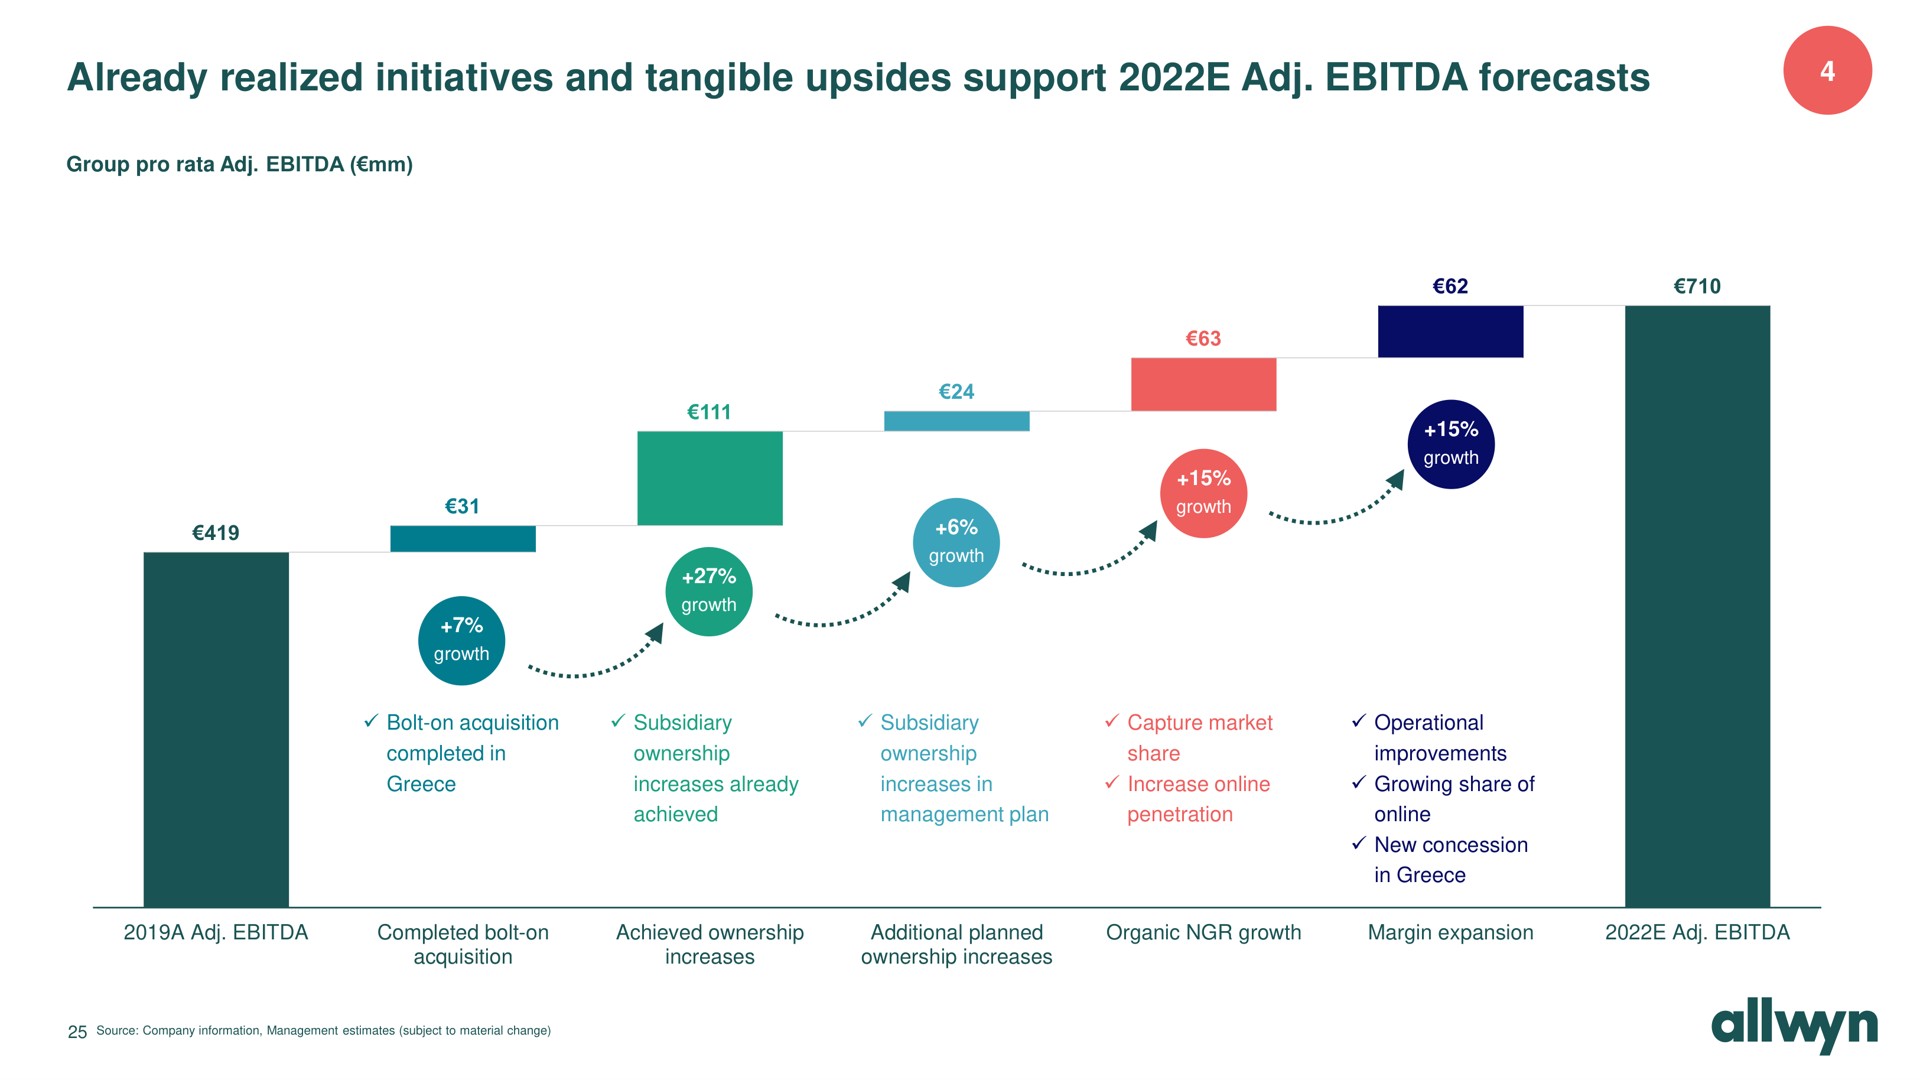 already realized initiatives and tangible upsides support forecasts | Allwyn